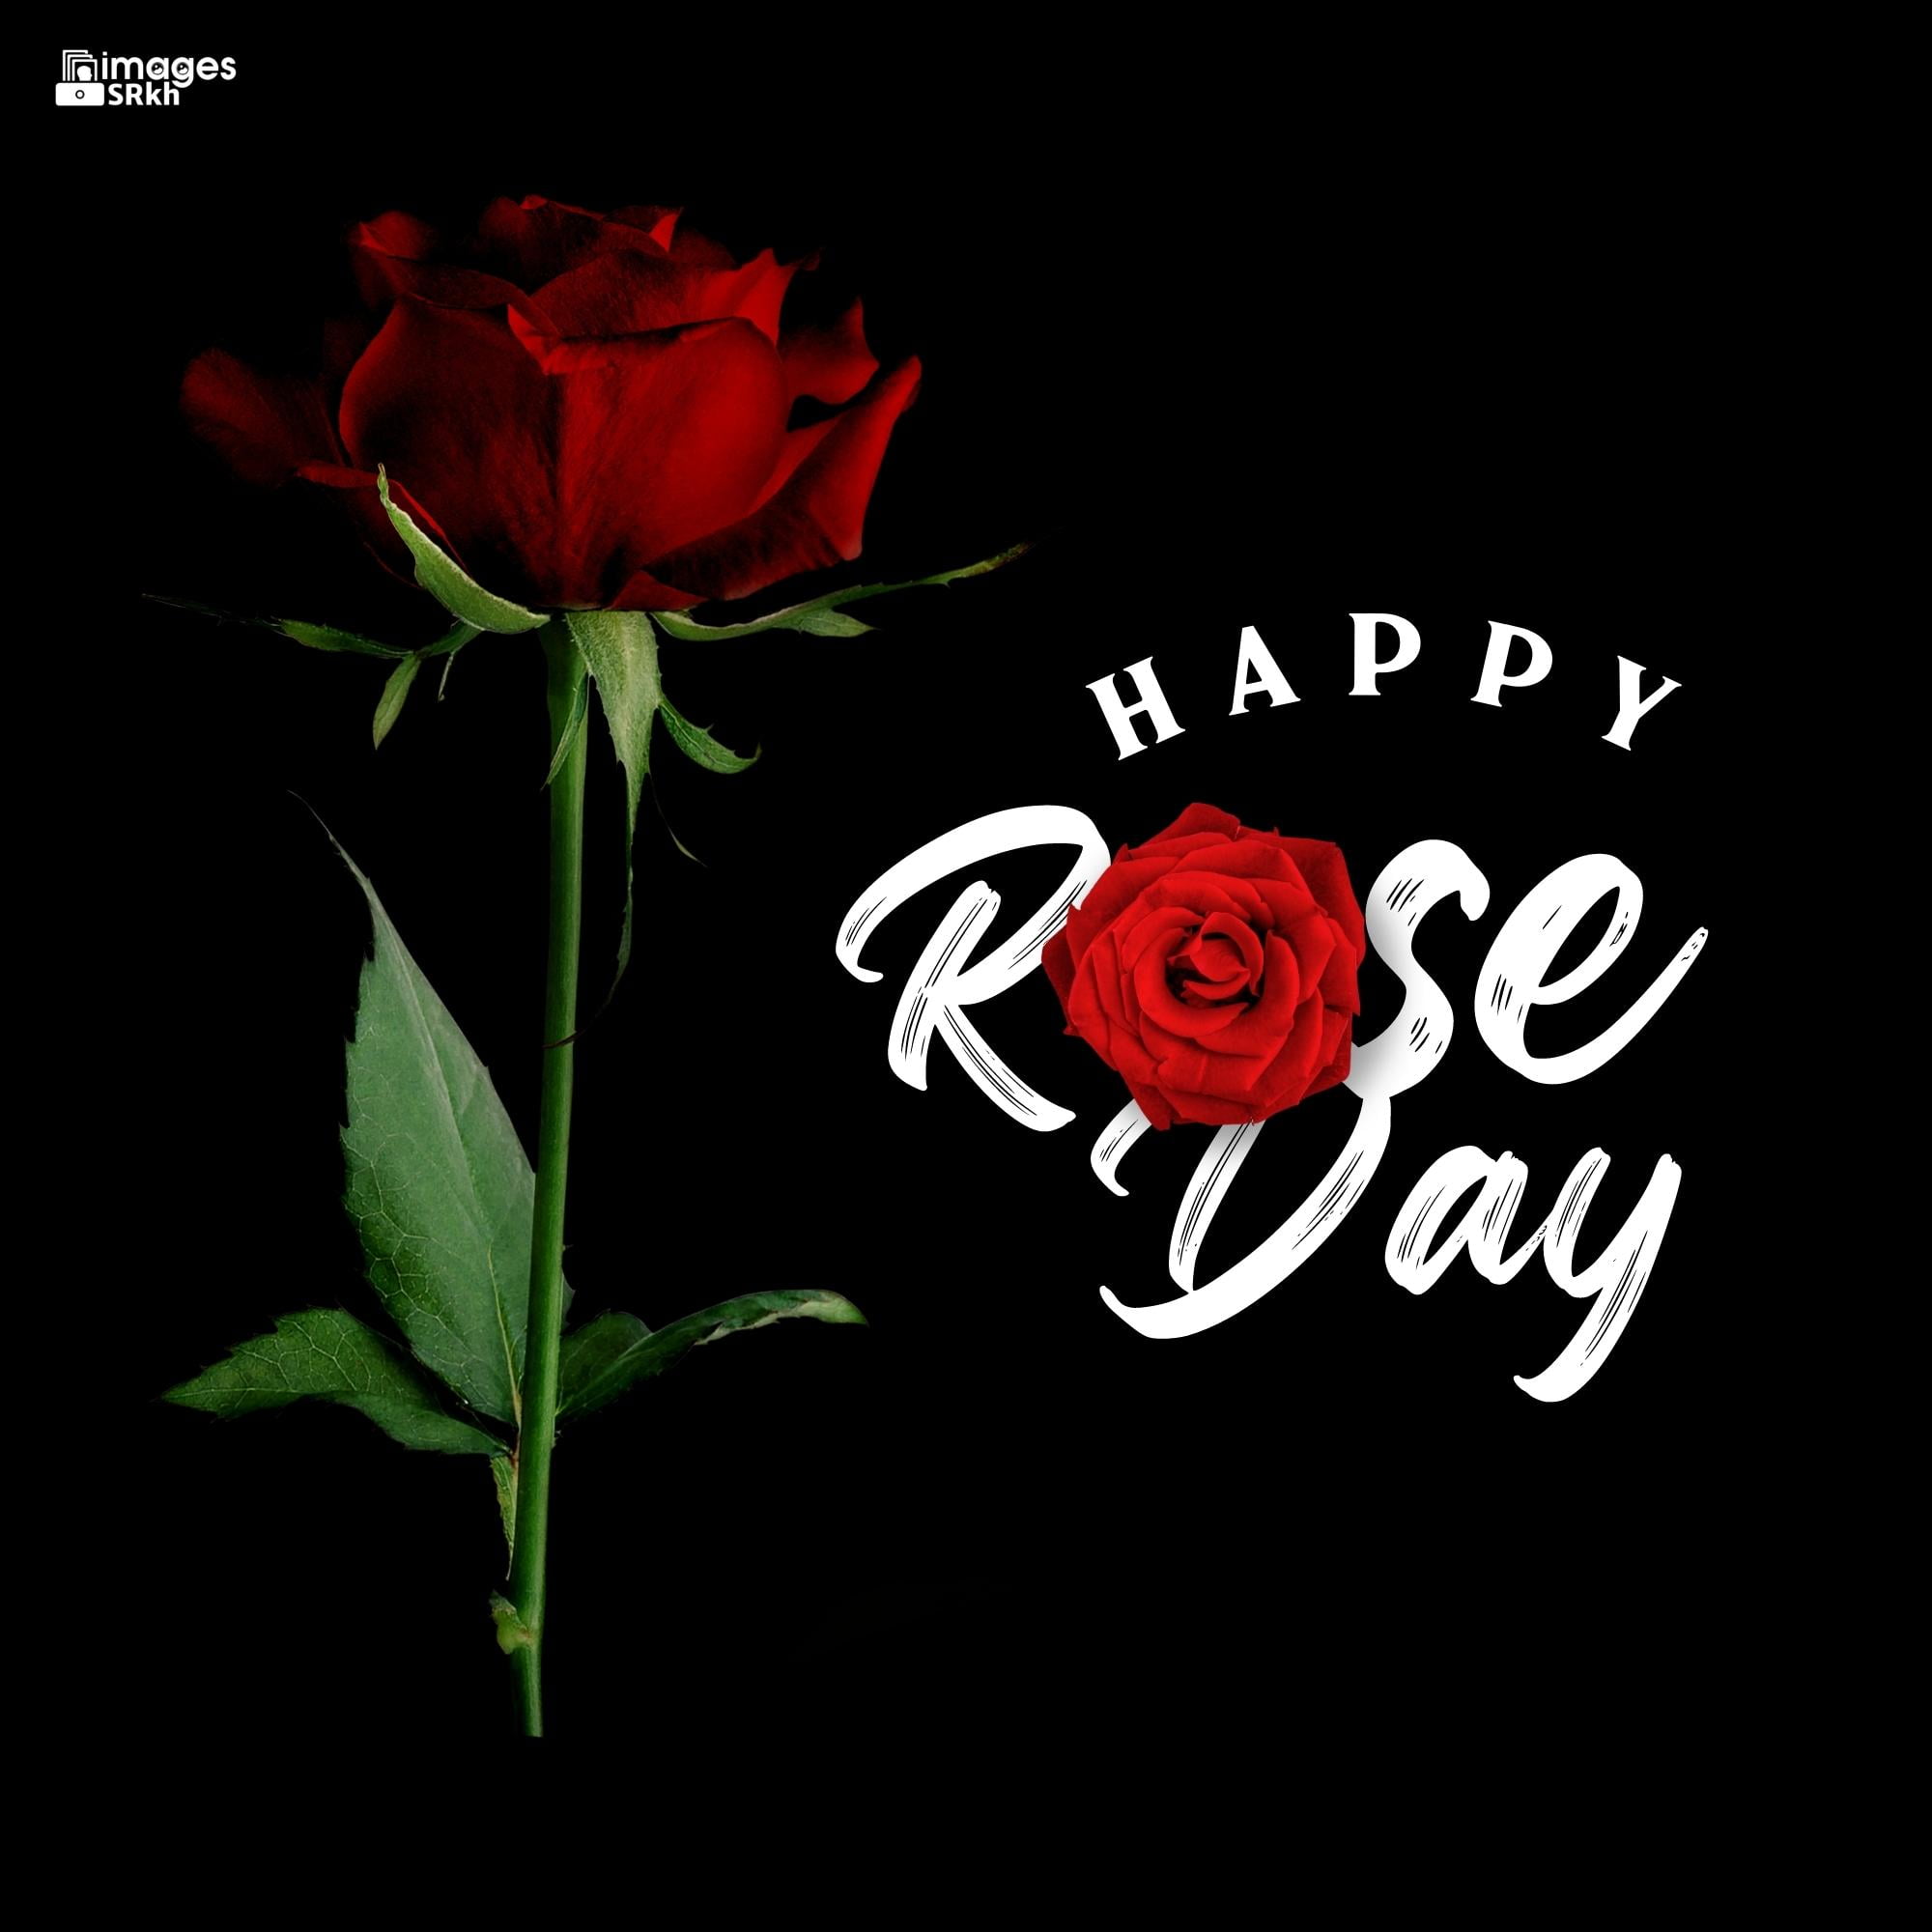 Happy Rose Day Image Hd Download (11)